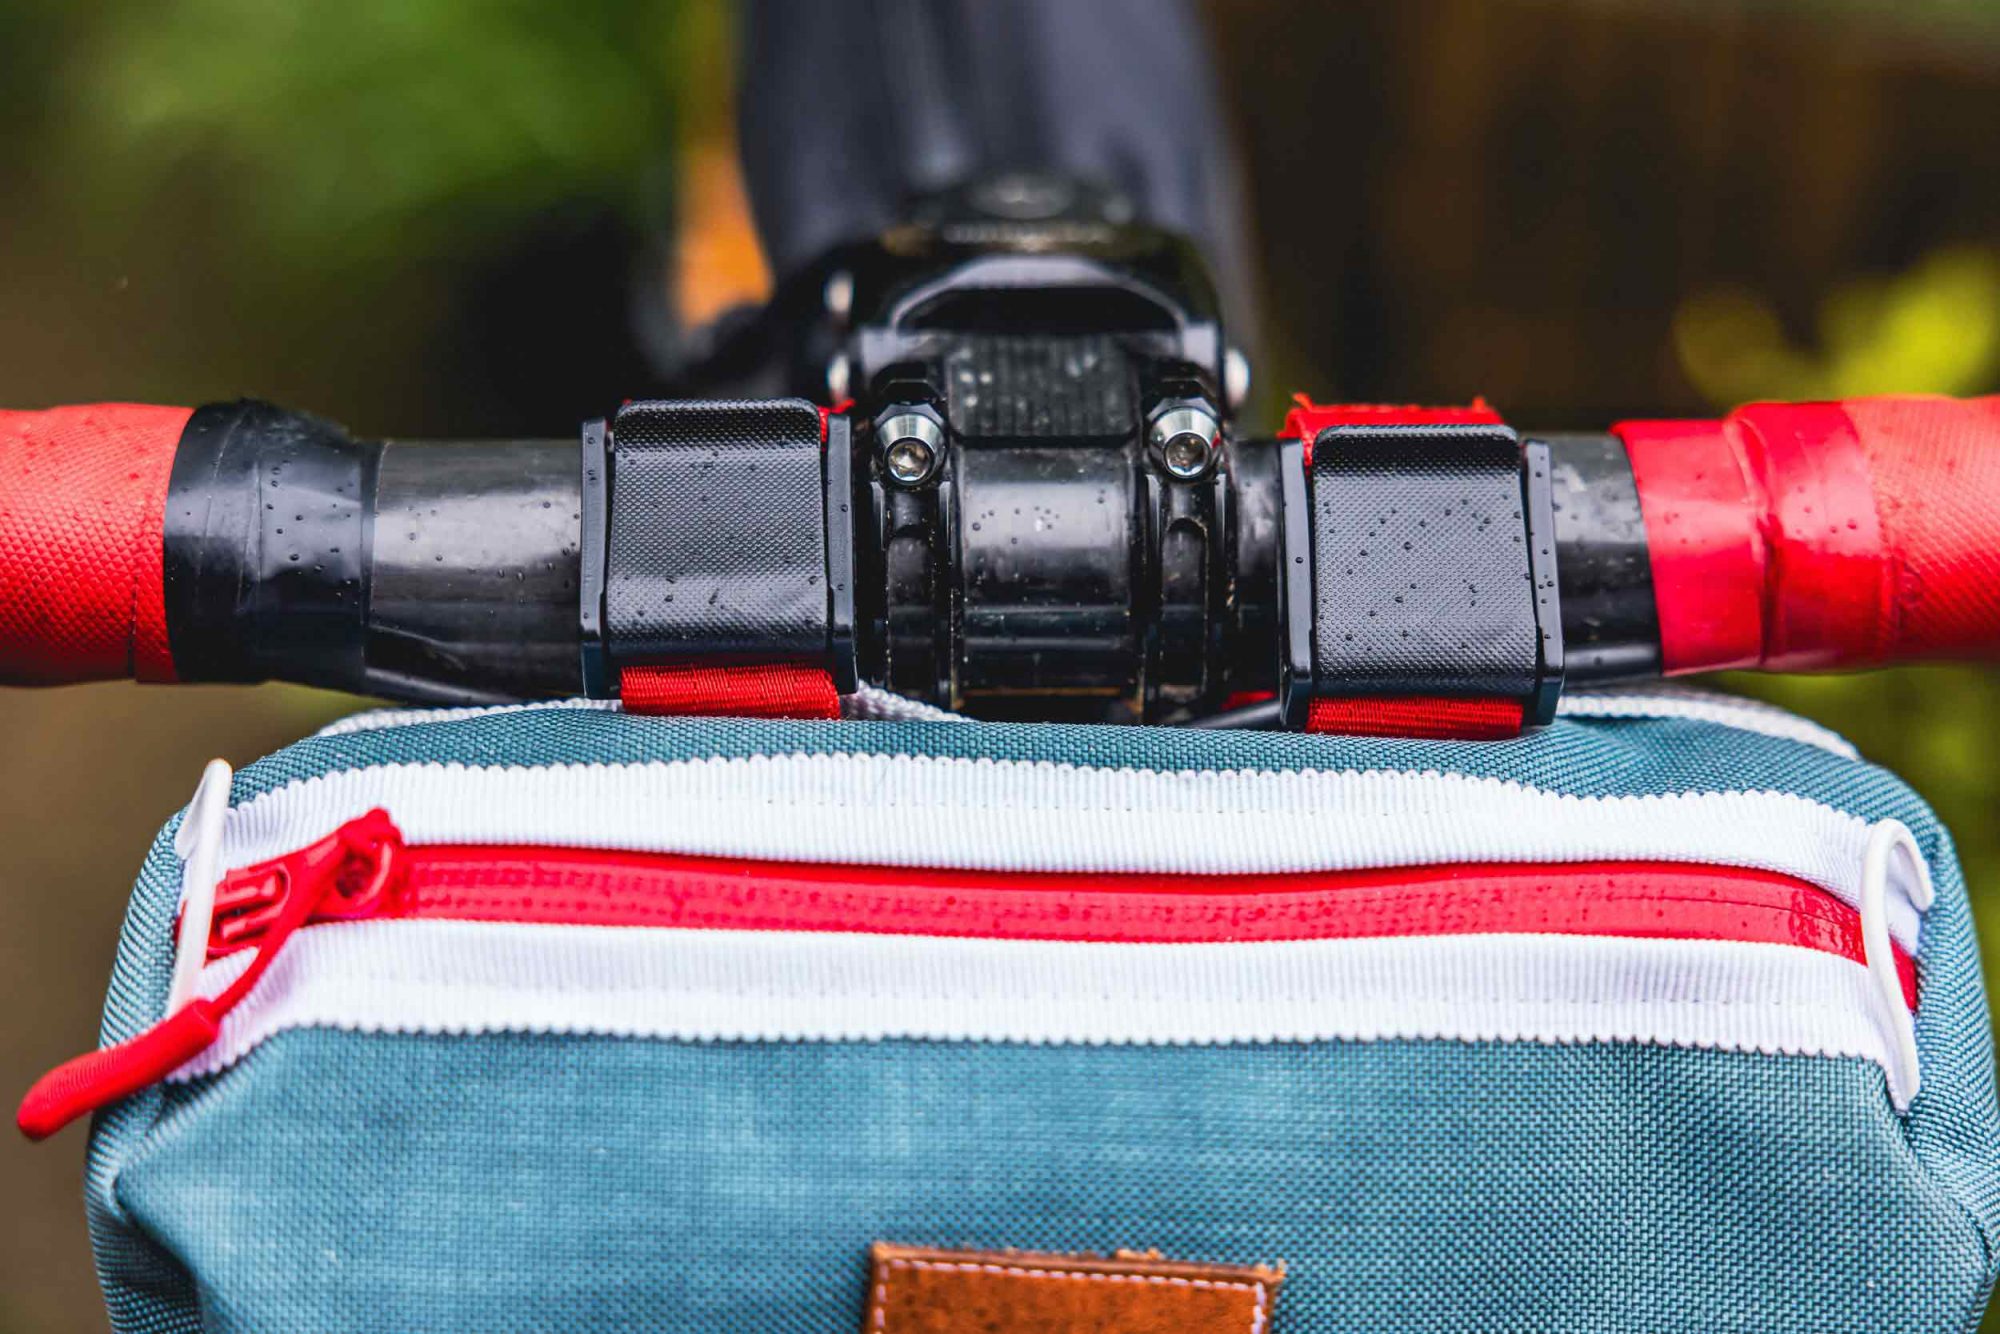 From the zip to the buckle: everything about the cnut handlebar bag is designed for durability.